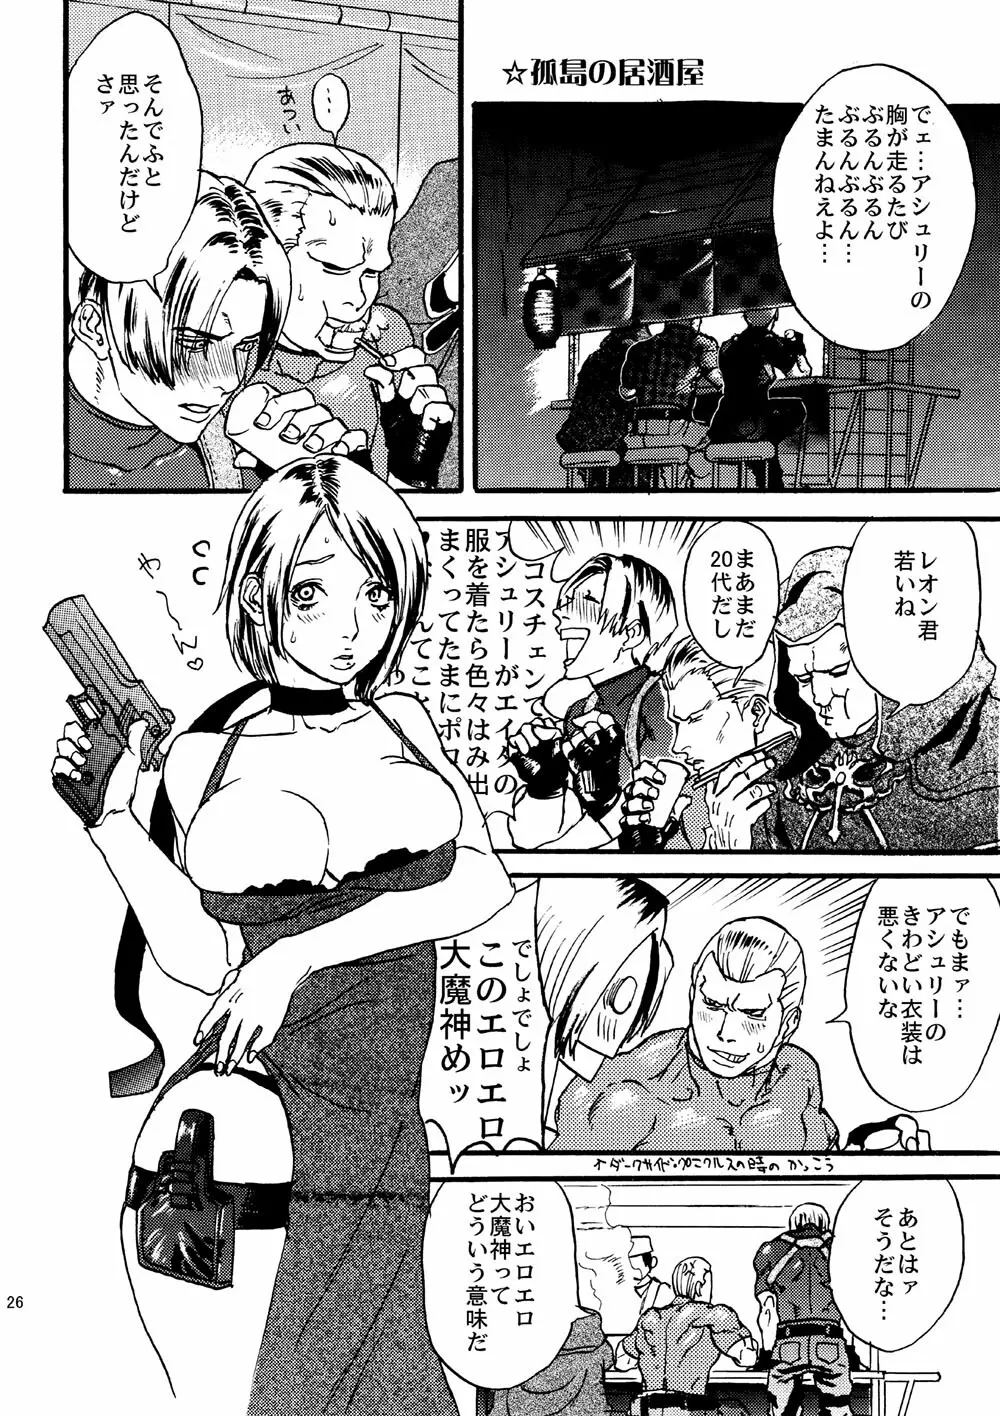 VILLAGE OF FEAR/バイオ４同人誌ｗｅｂ再録 Page.23